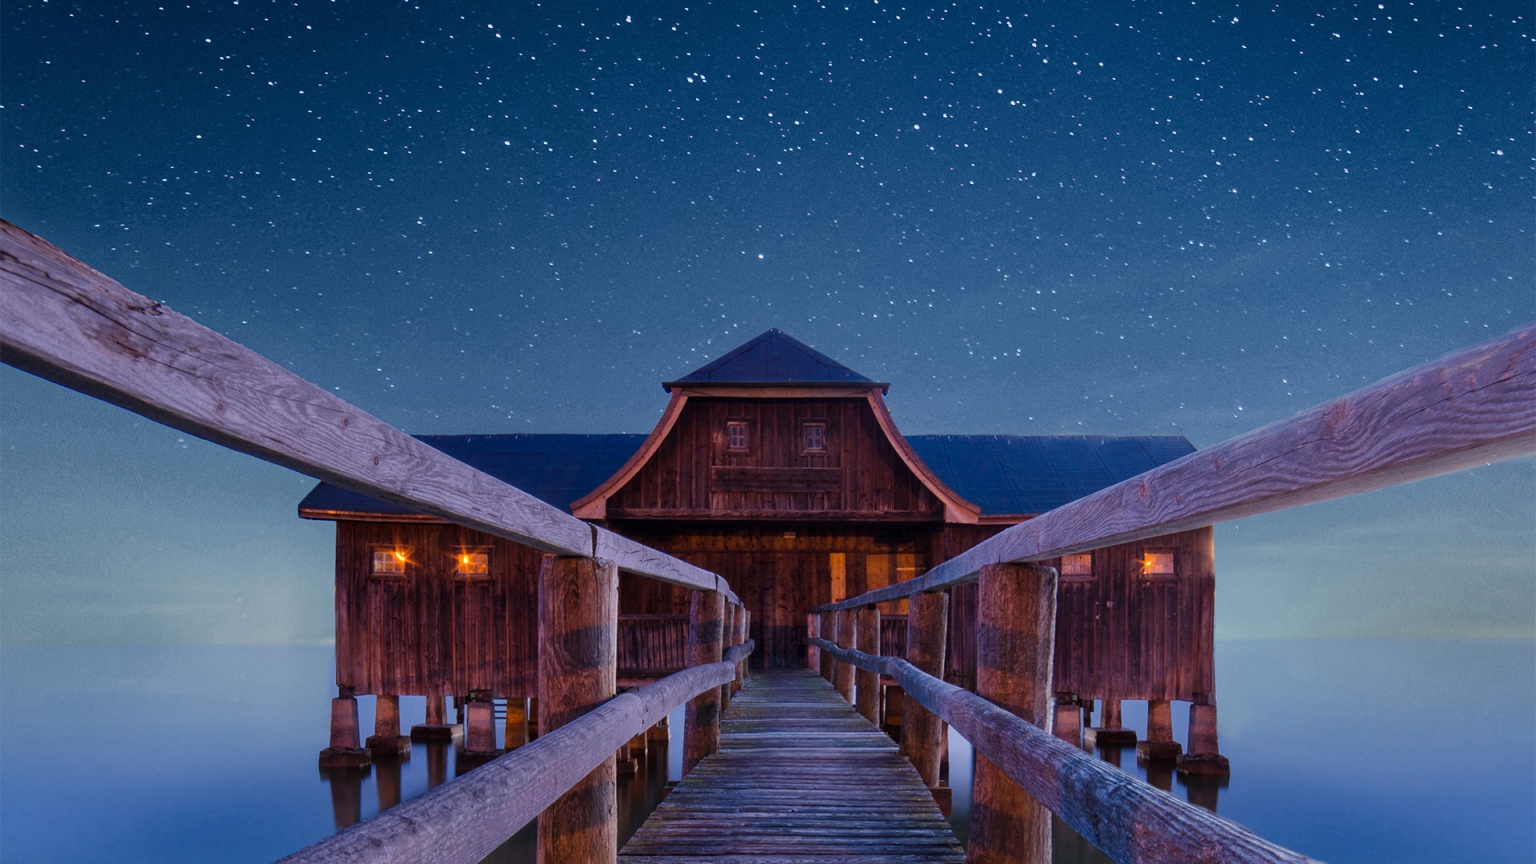 Boathouse at Night for 1536 x 864 HDTV resolution